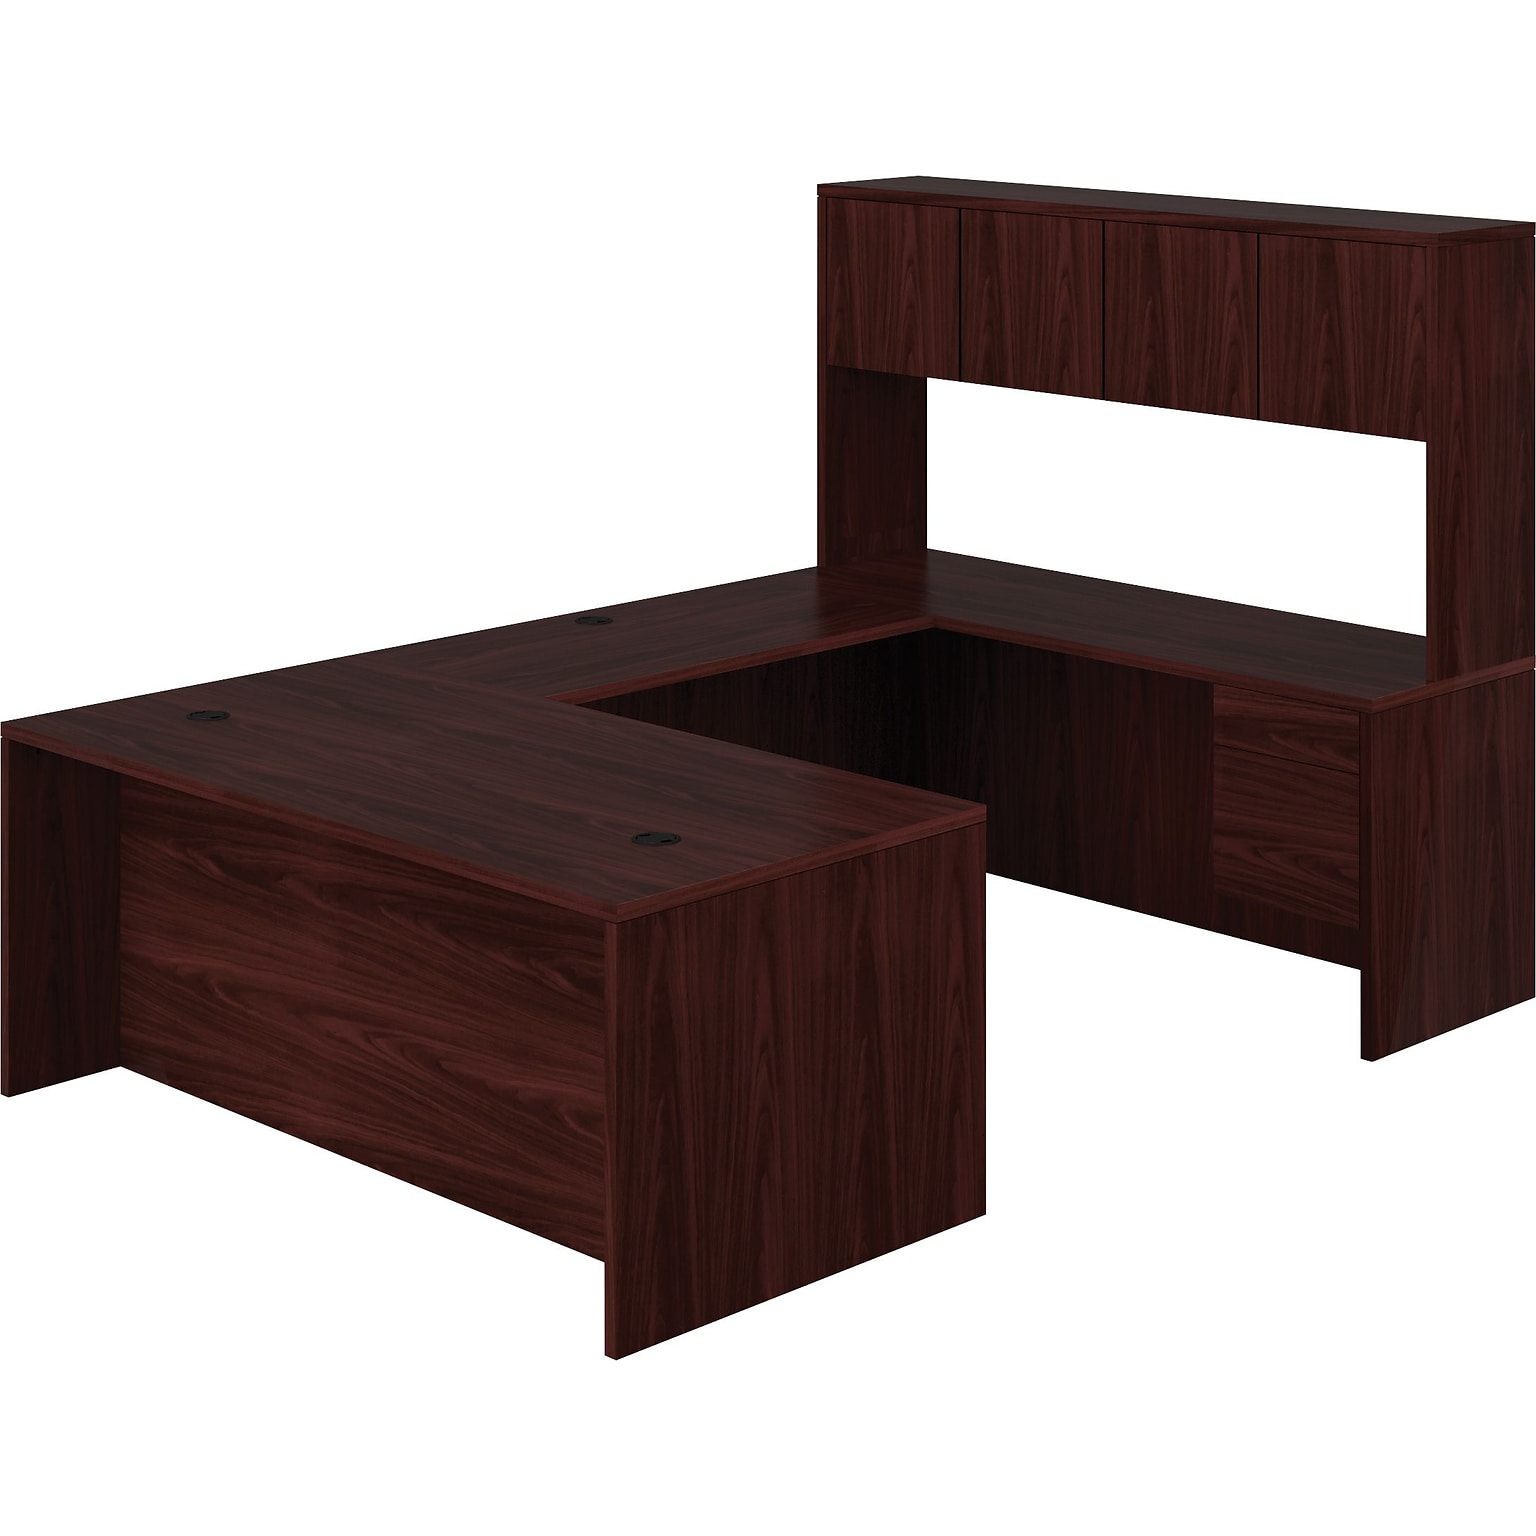 HON 10500 Series Bundle Solutions Left U-Station with Stack-On Storage, Mahogany, 72 x 108